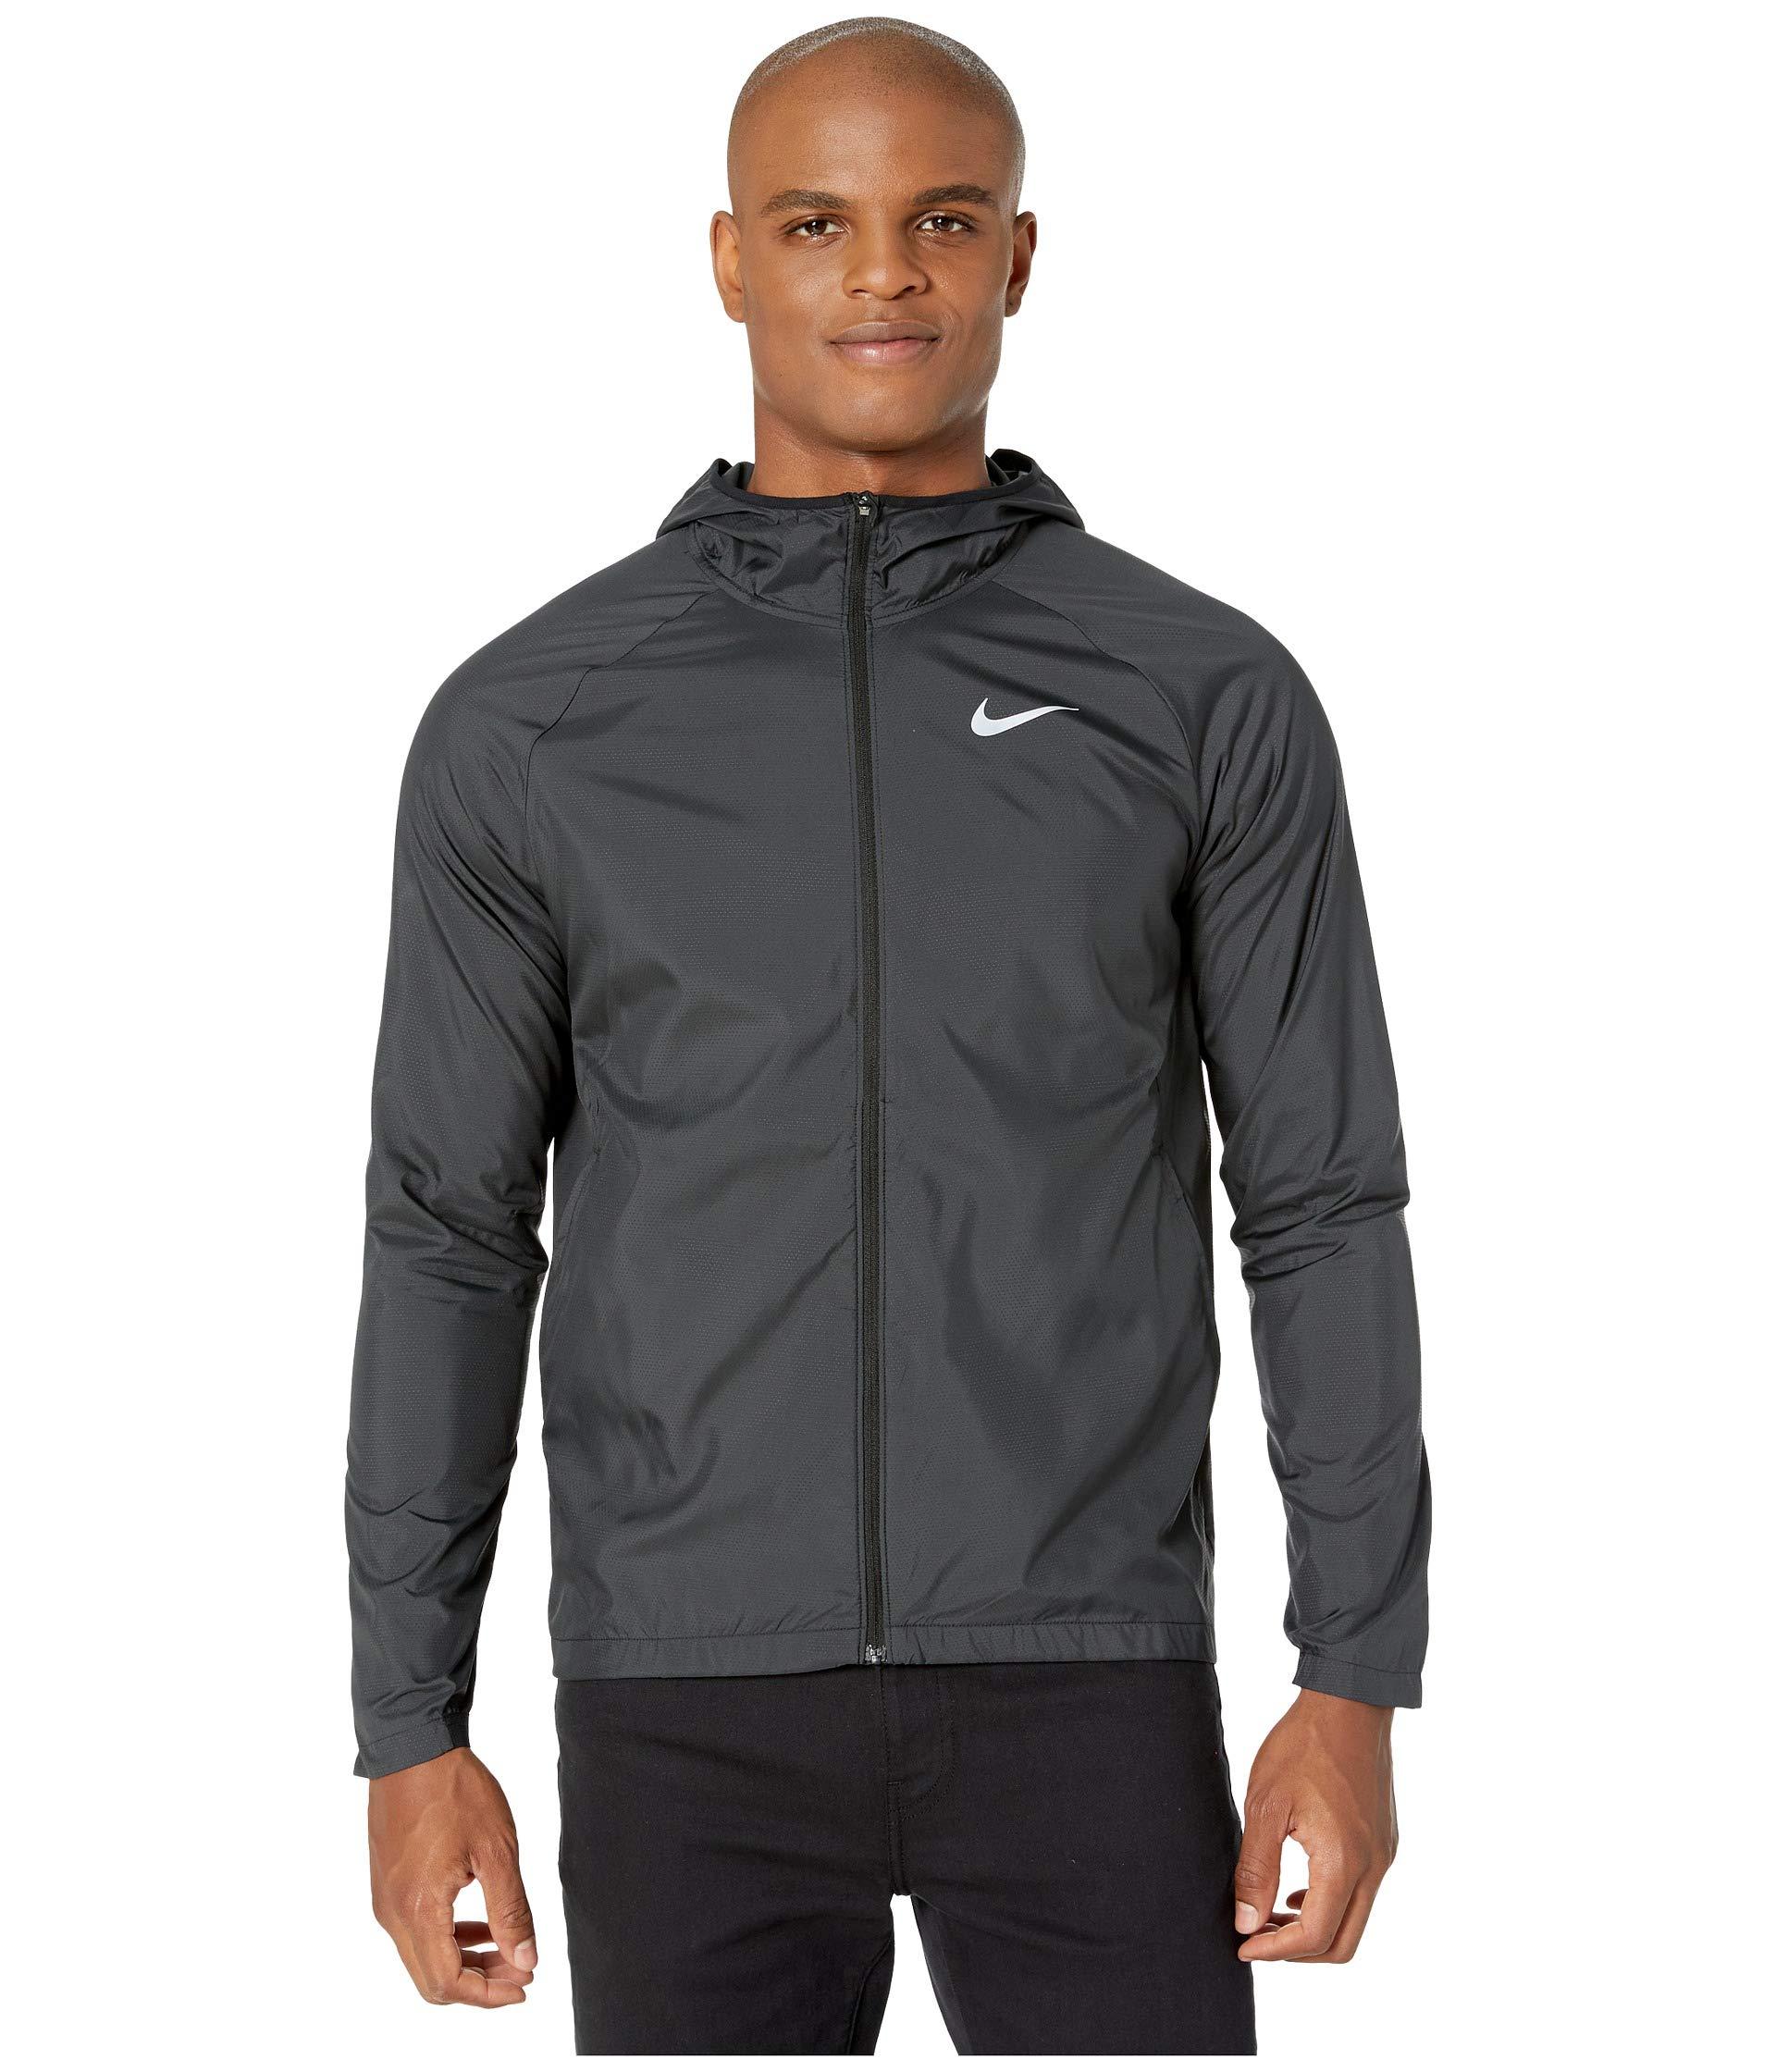 Nike Synthetic Essential Jacket in Black for Men - Lyst